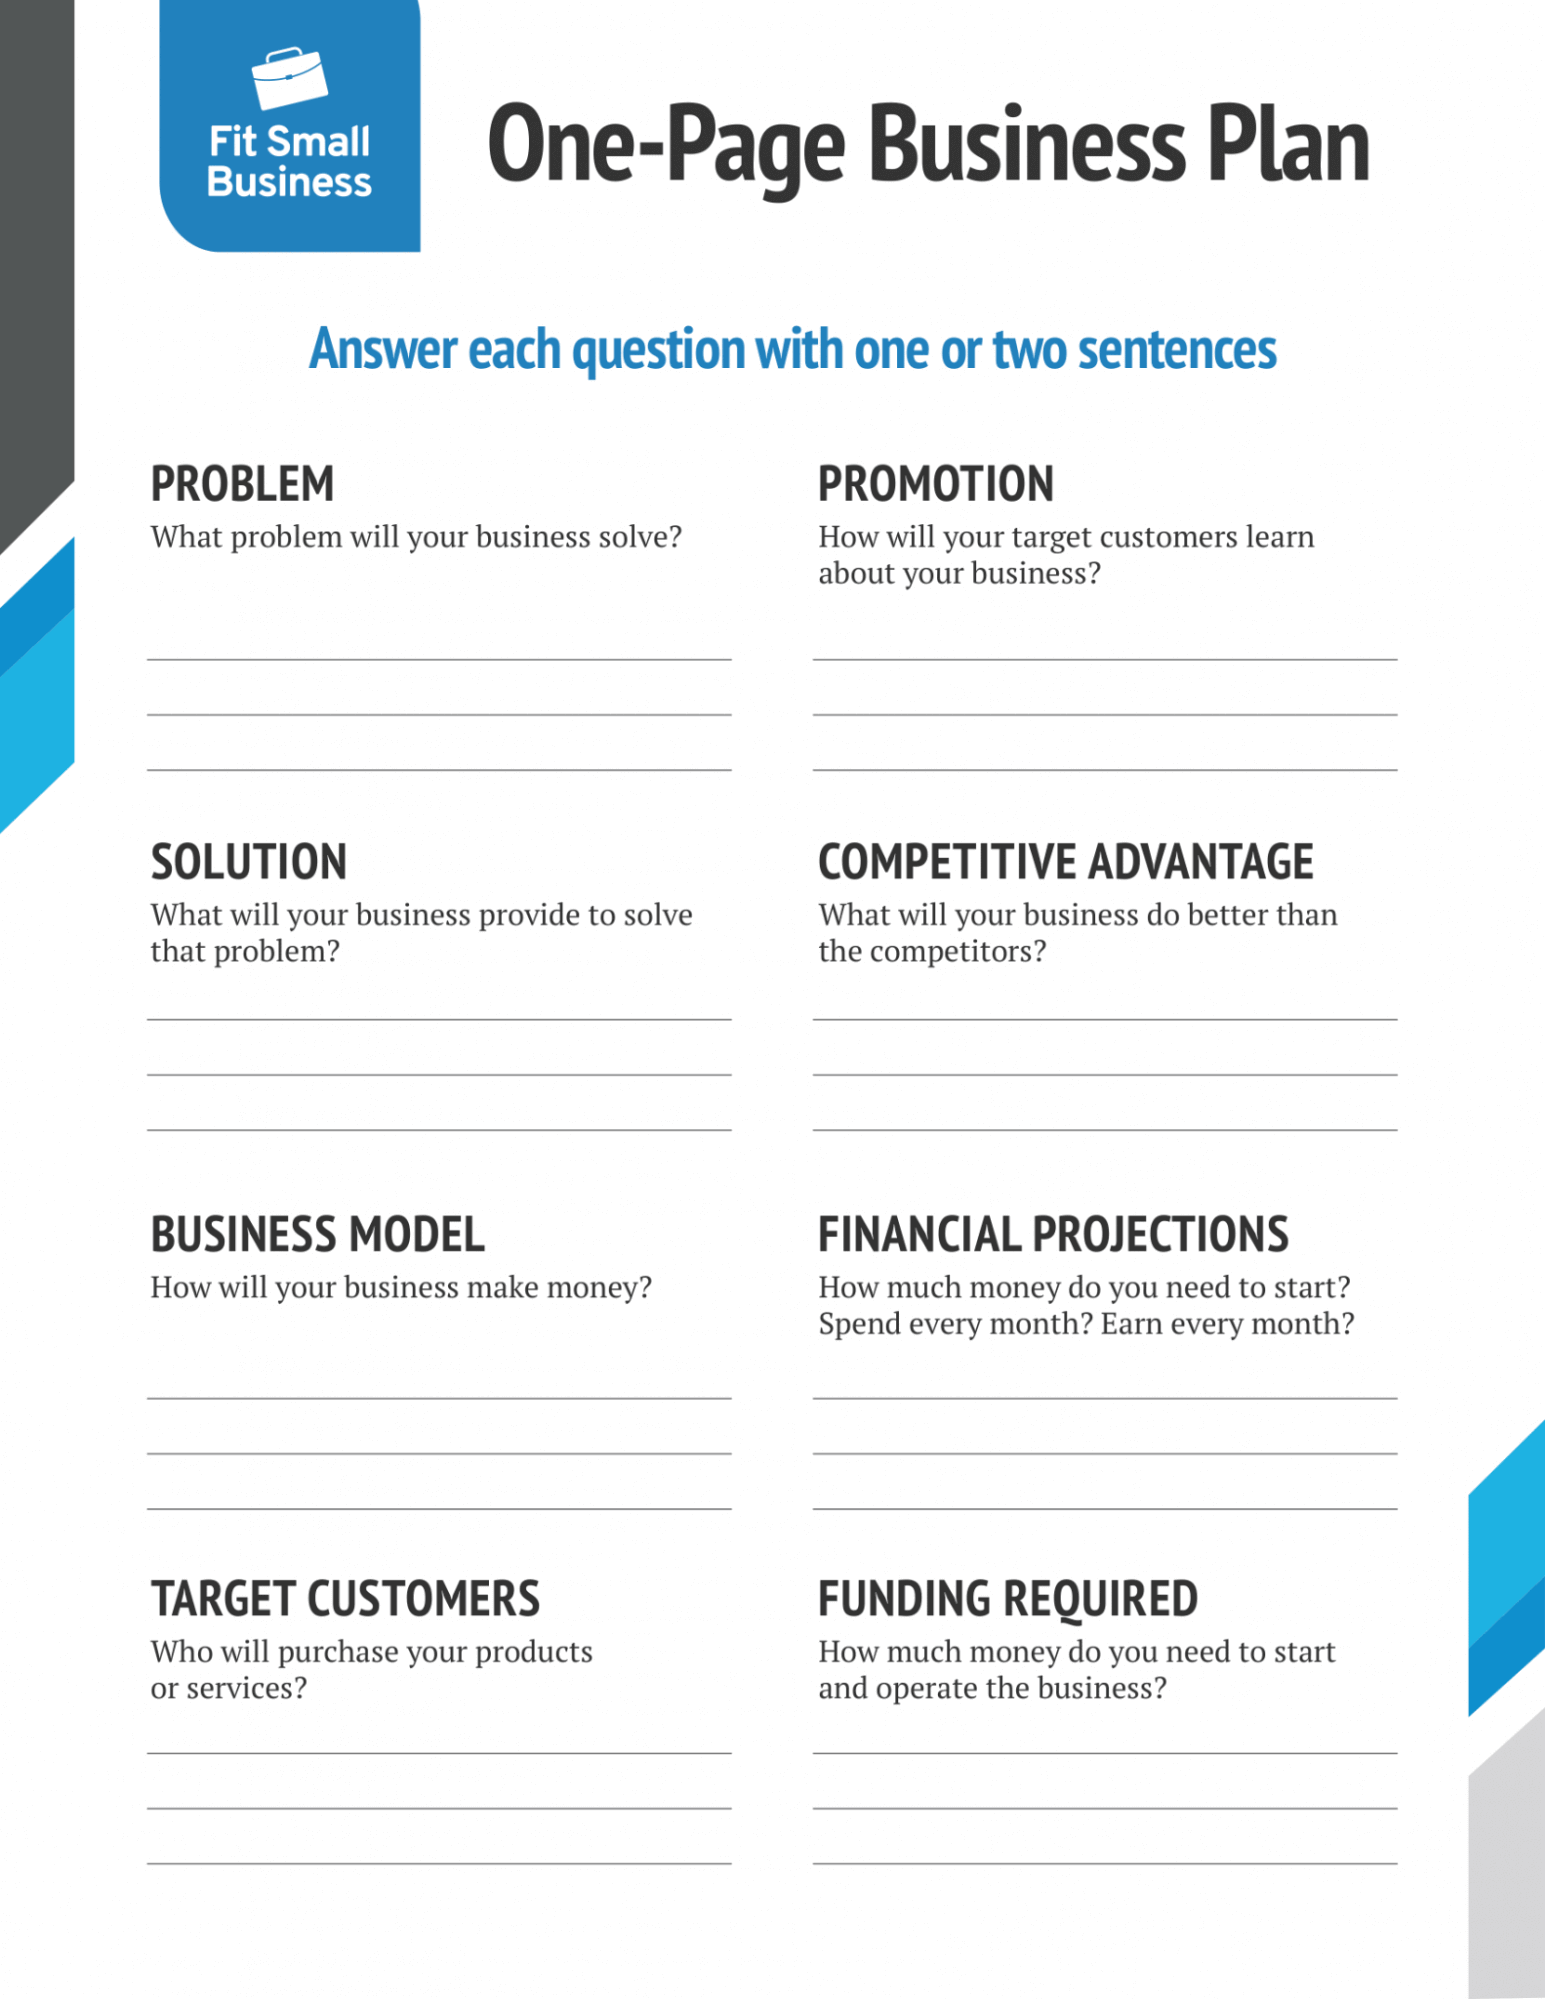 A simple business plan template with prompt questions